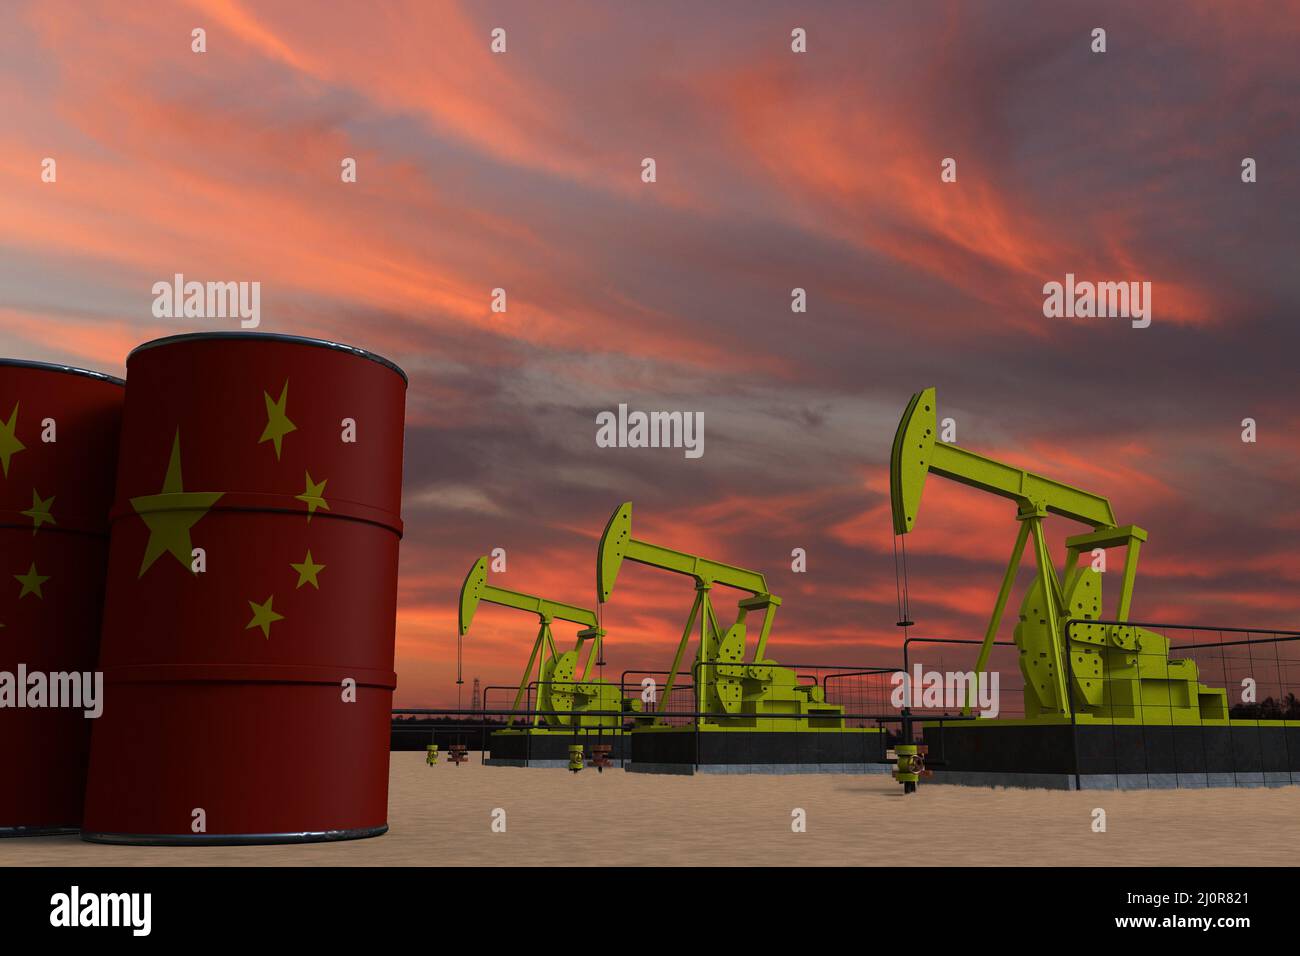 Nice pumpjack oil extraction and cloudy sky in sunset with the CHINA flag on oil barrels 3D rendering Stock Photo